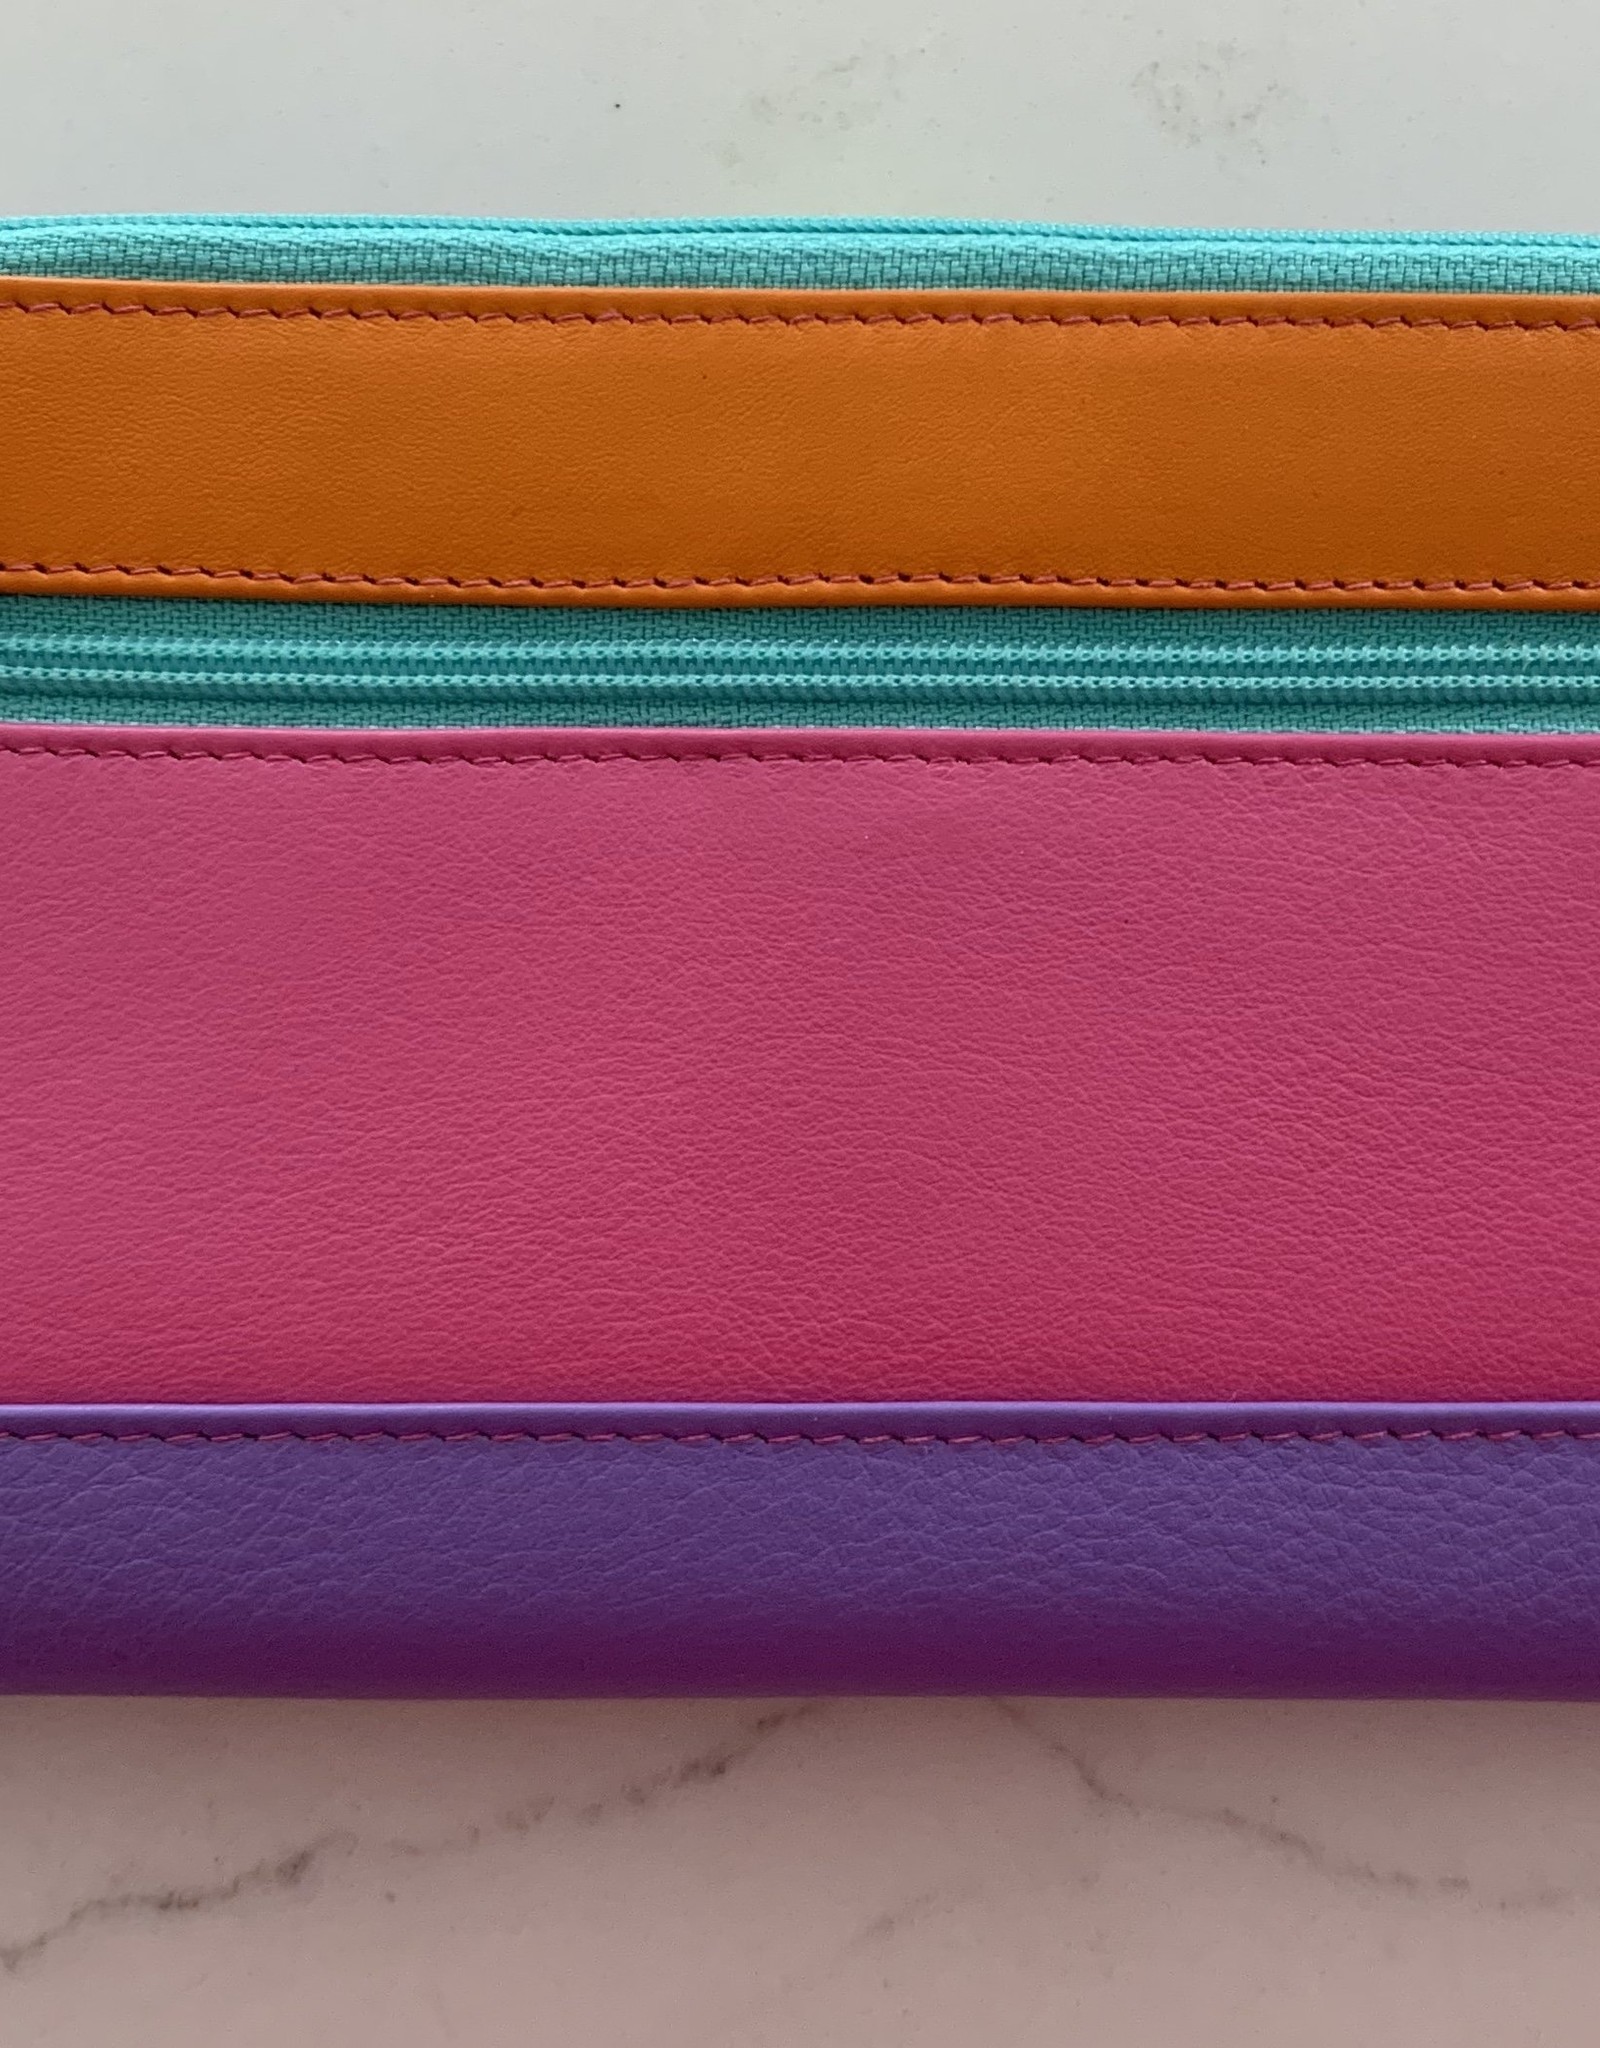 Long RFID Leather Wallet